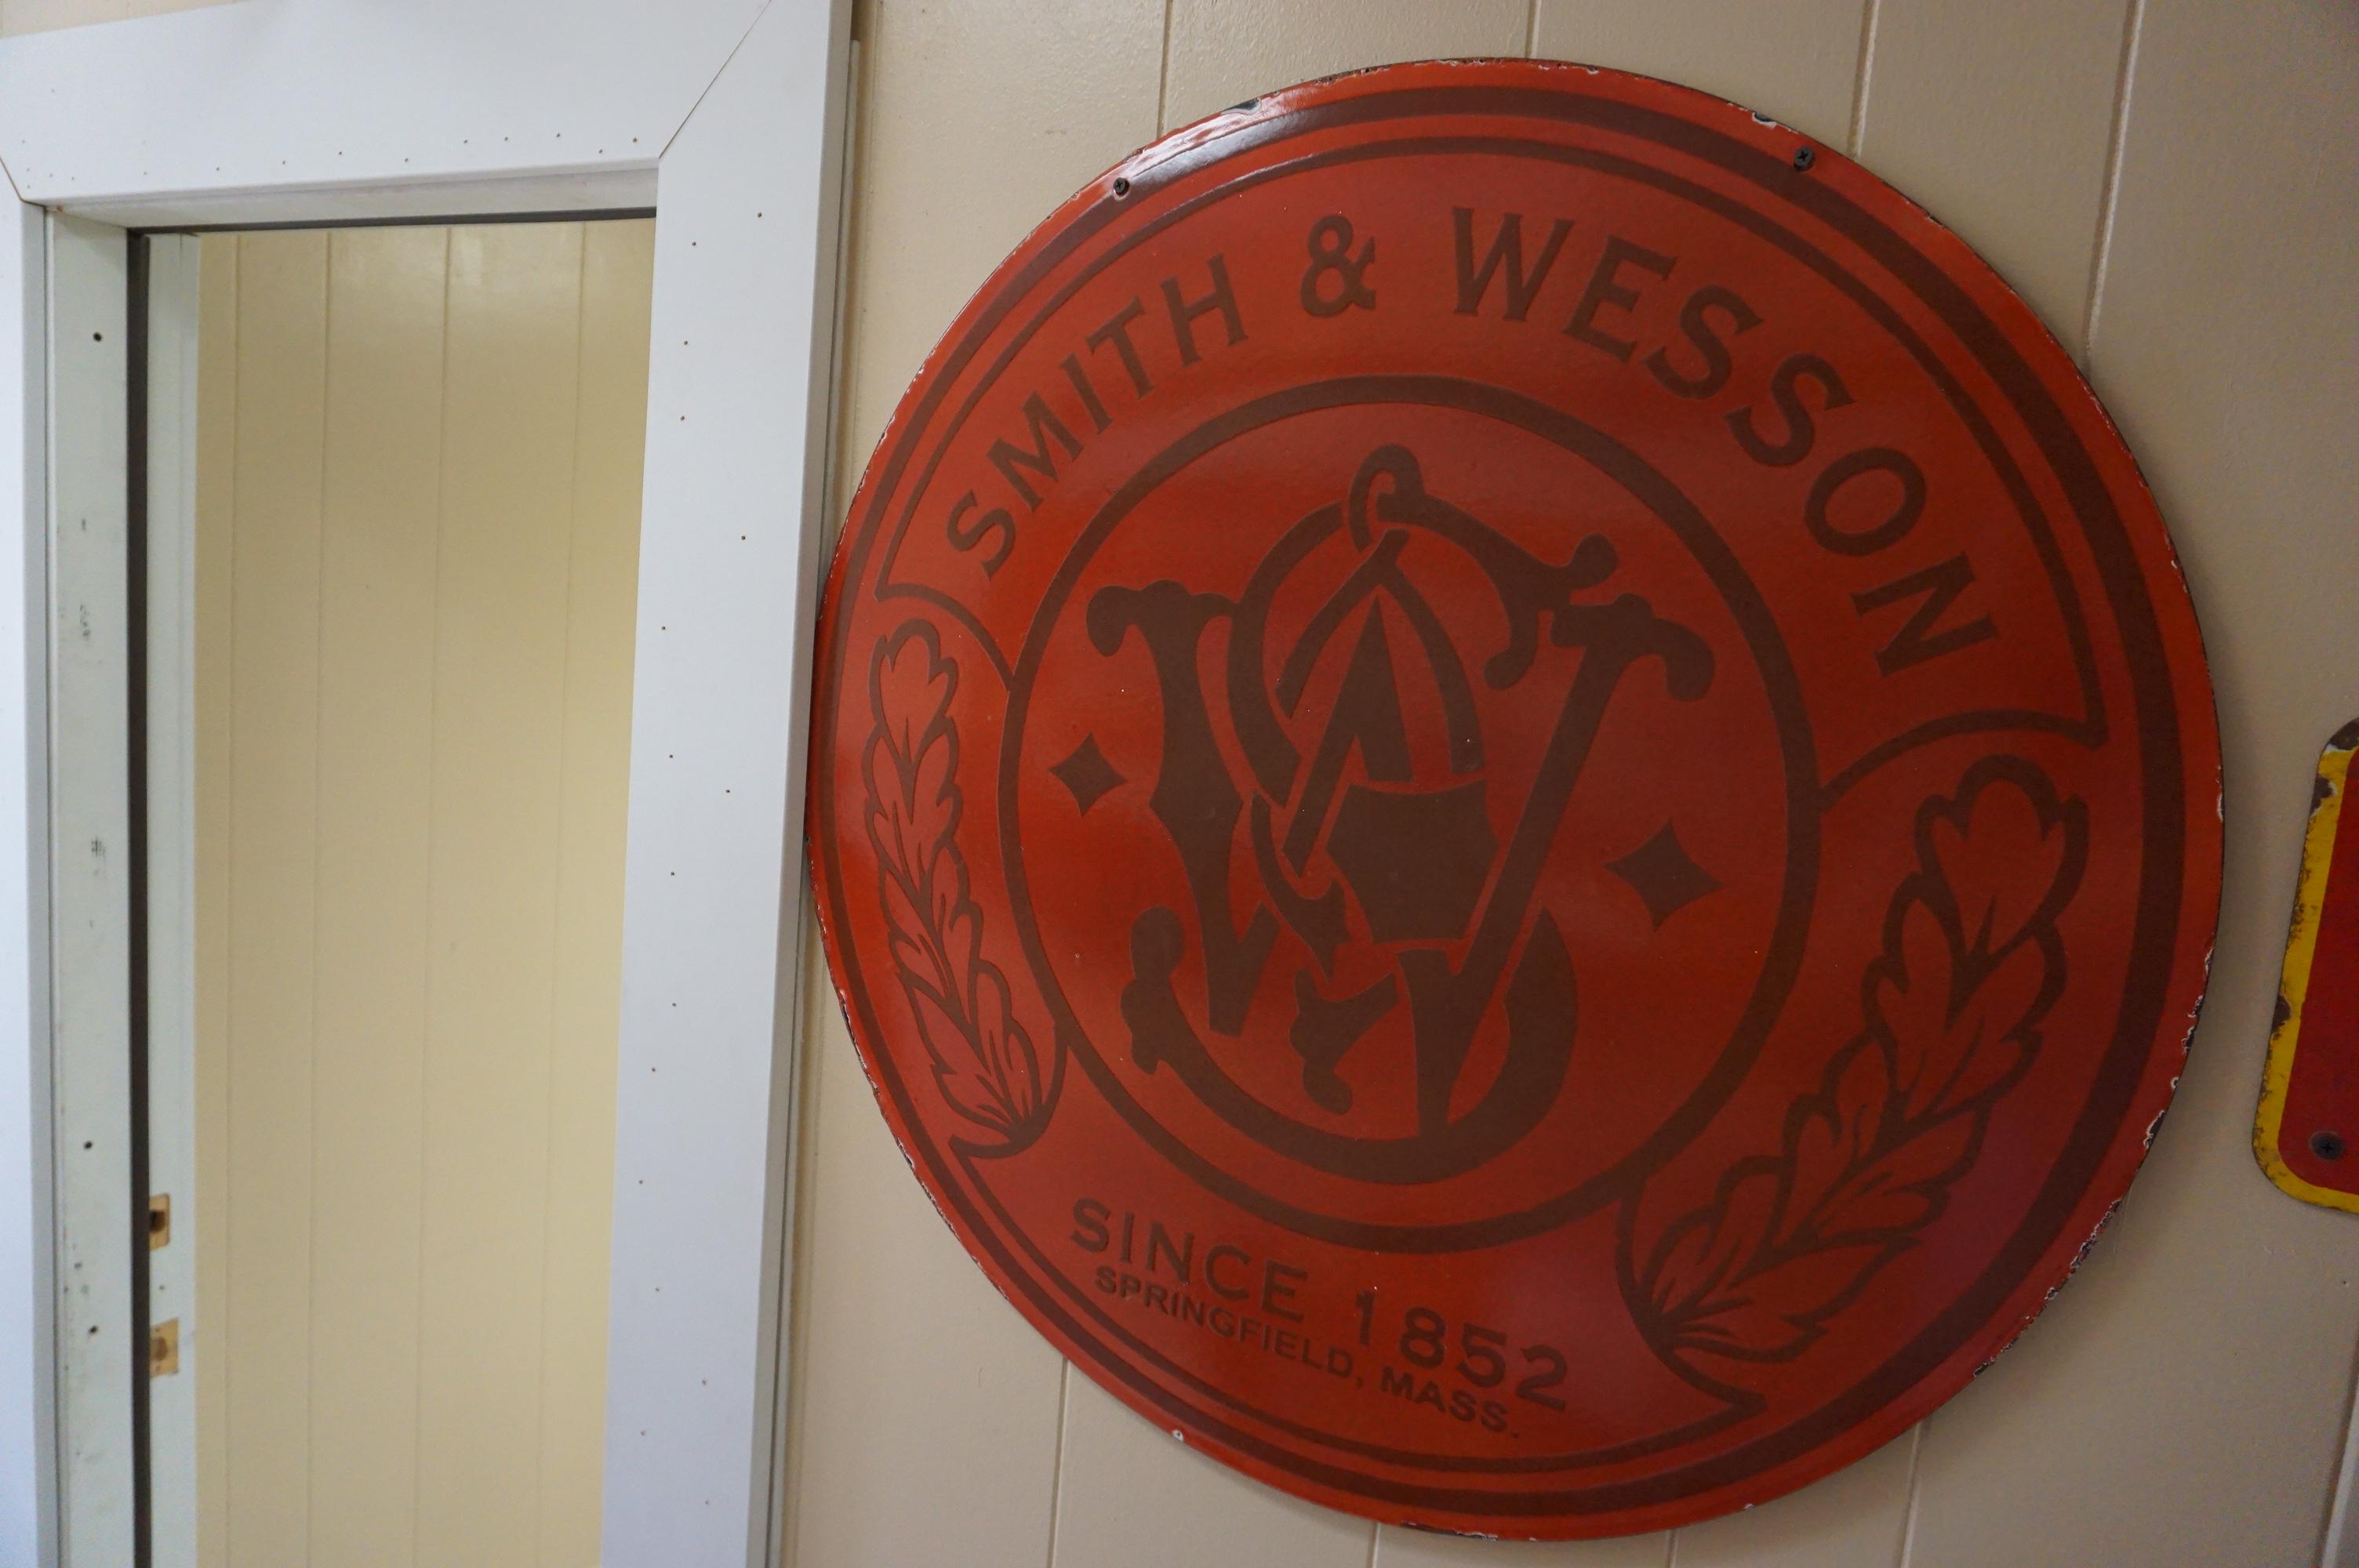 30" DOUBLE SIDED Smith & Wesson Porcelain on Steel Sign, $60 Shipping to Lower 48 States.